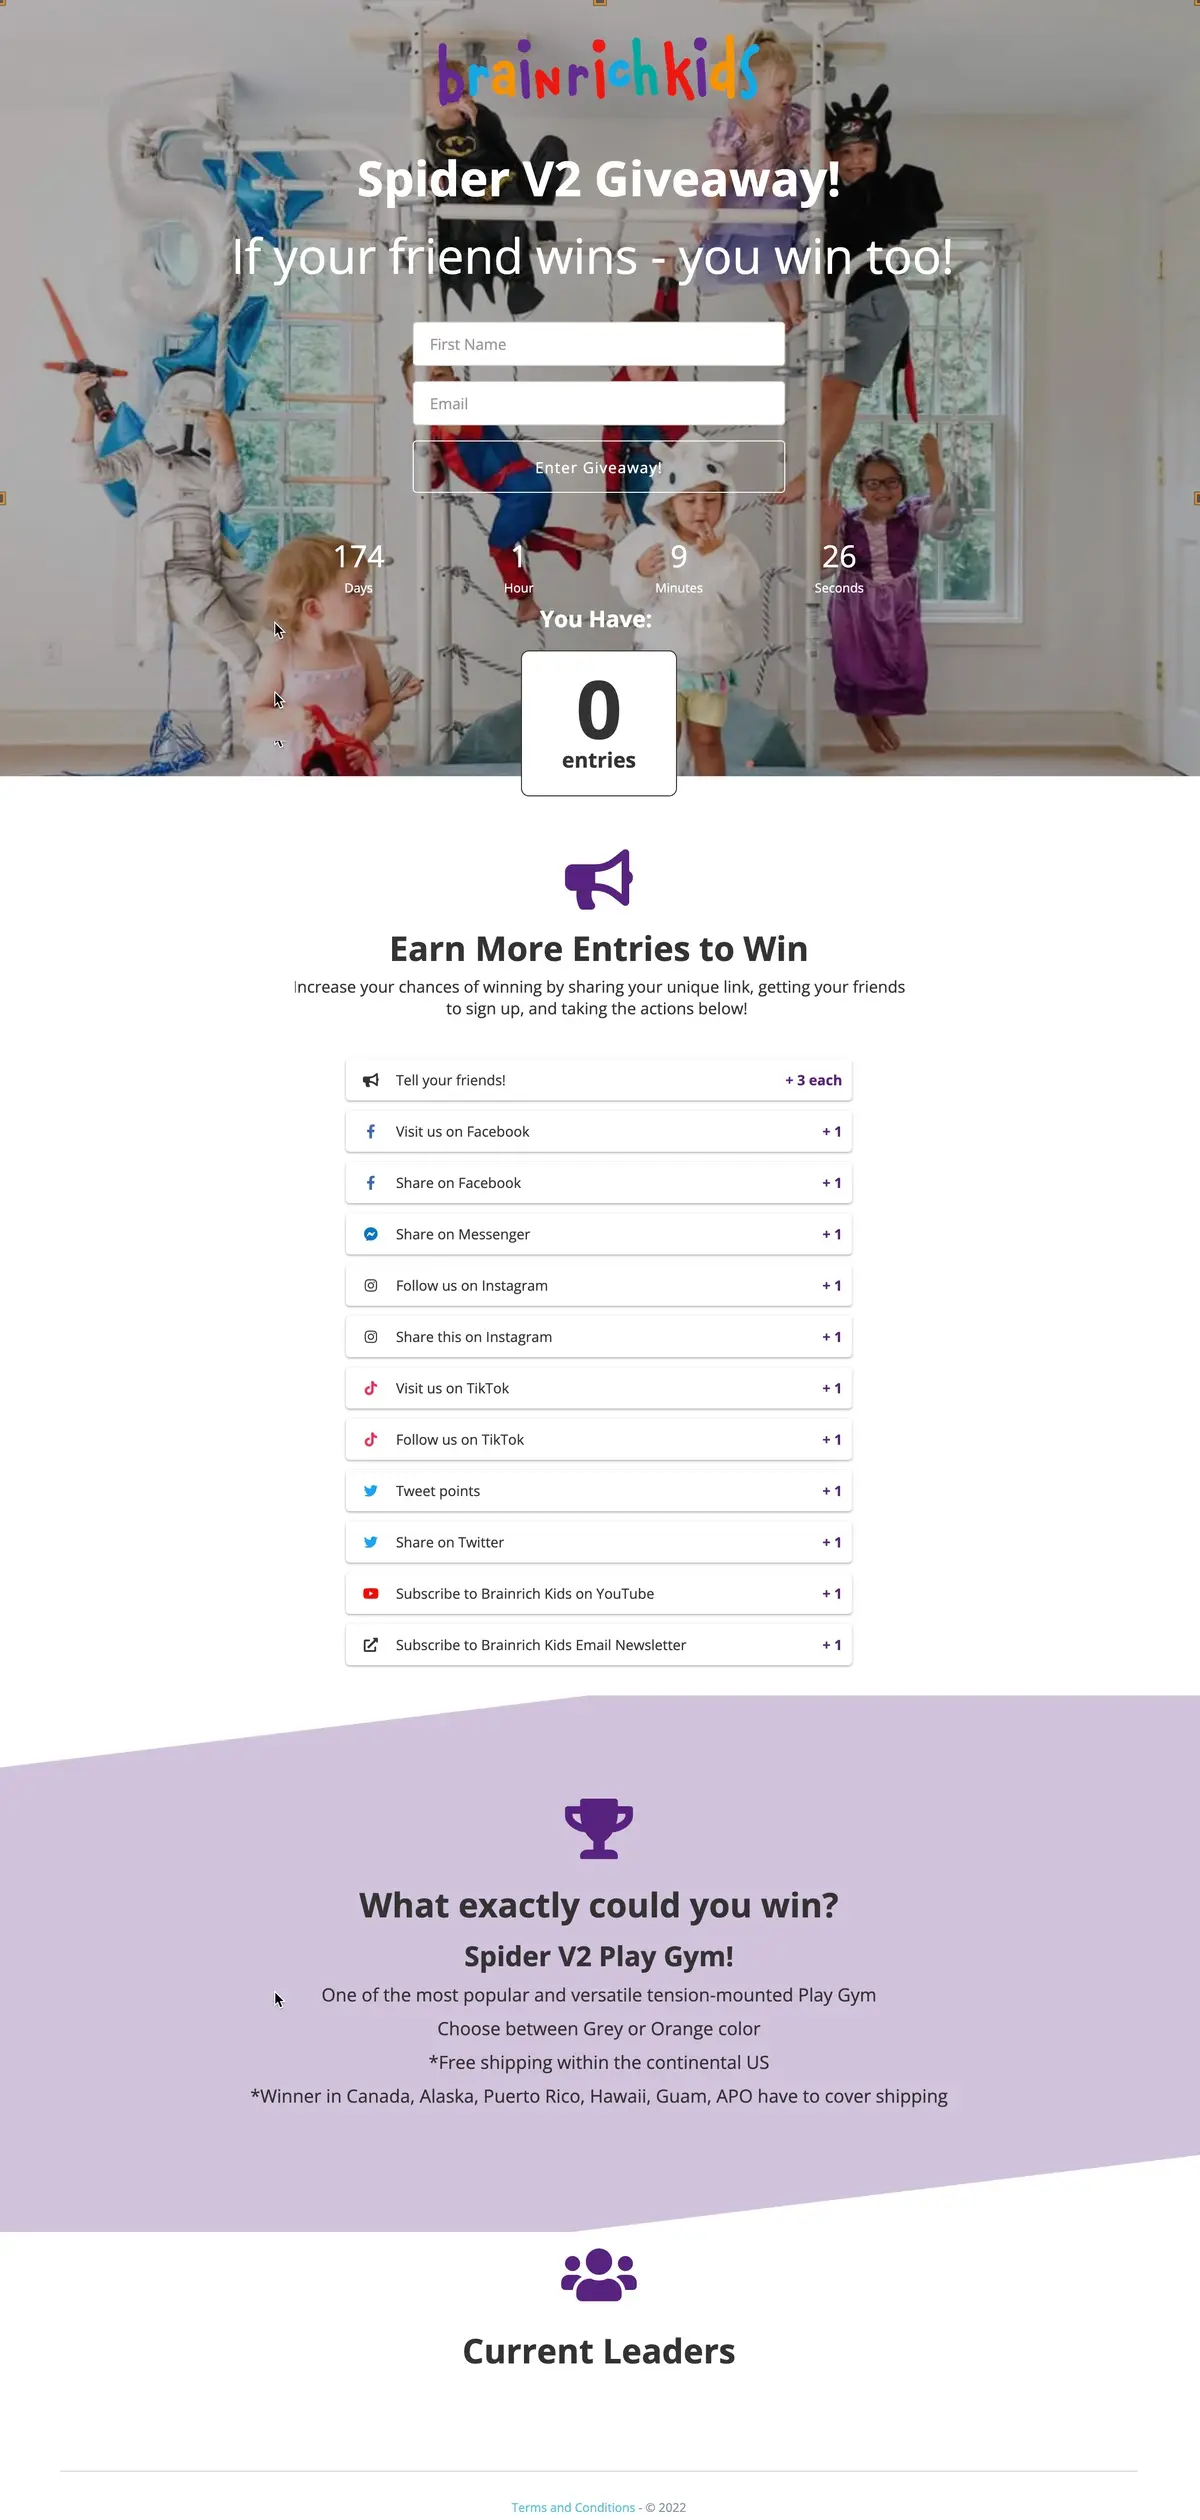 Brain rich kids landing page example- actions to earn more points win product.